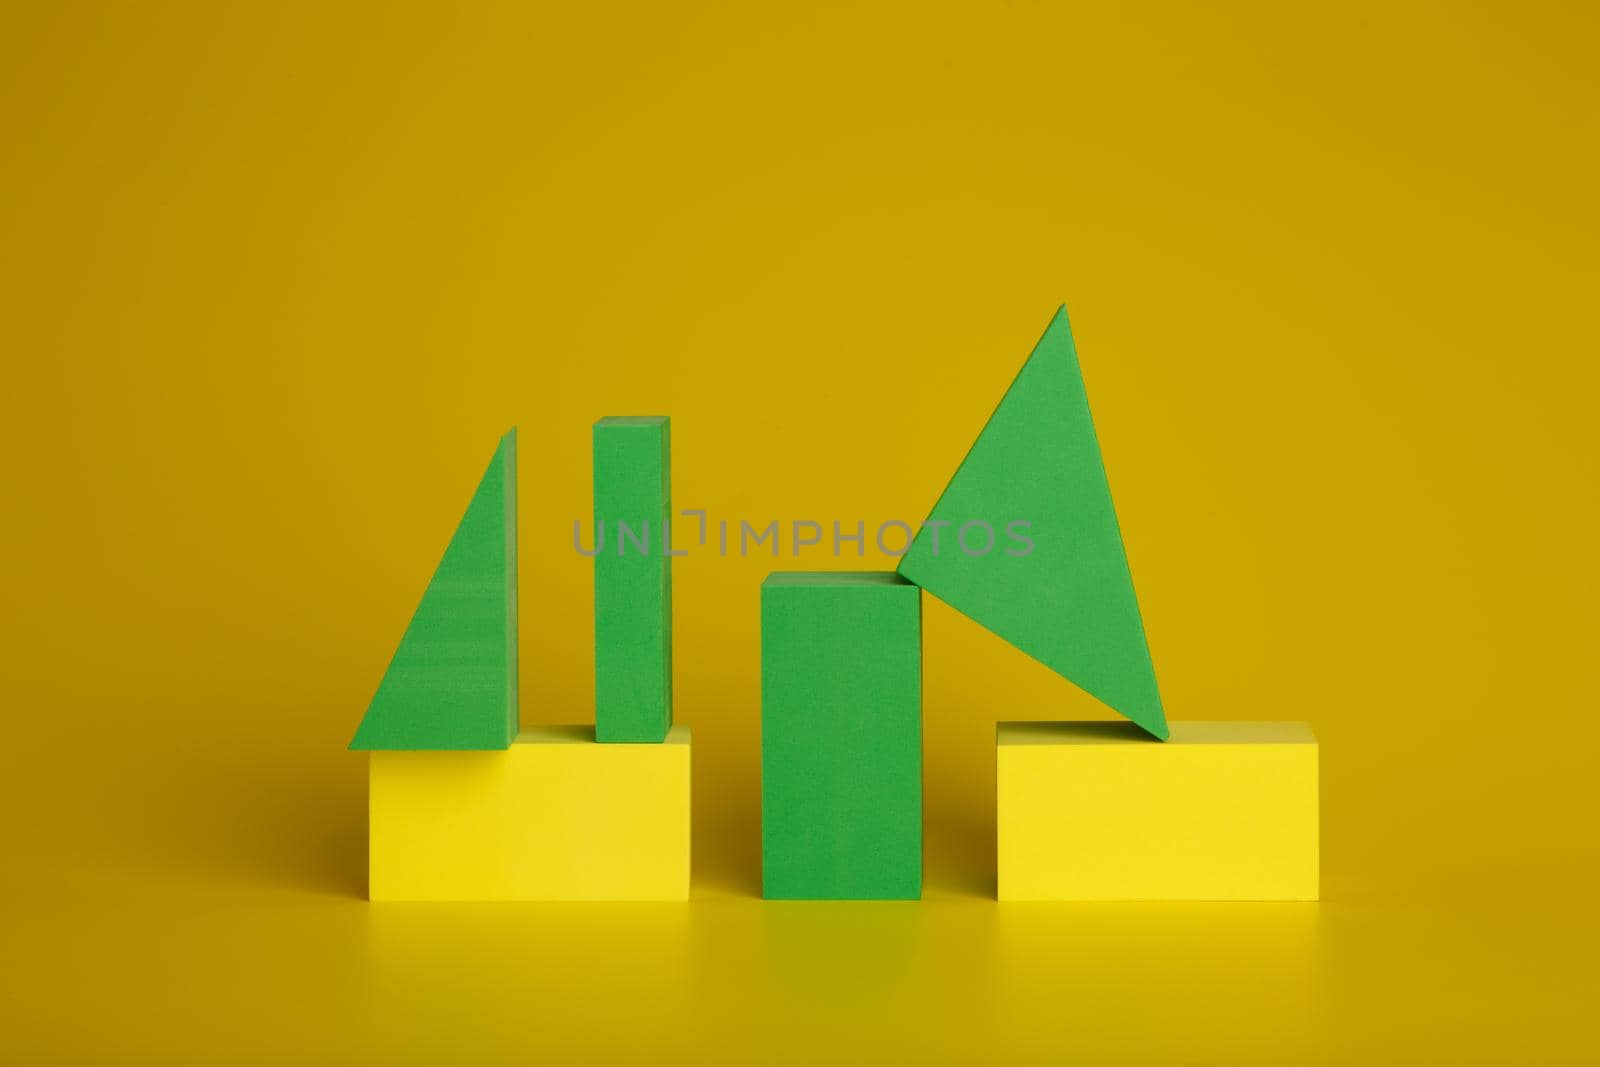 Abstract duotone background with green and yellow geometric figures on yellow background by Senorina_Irina